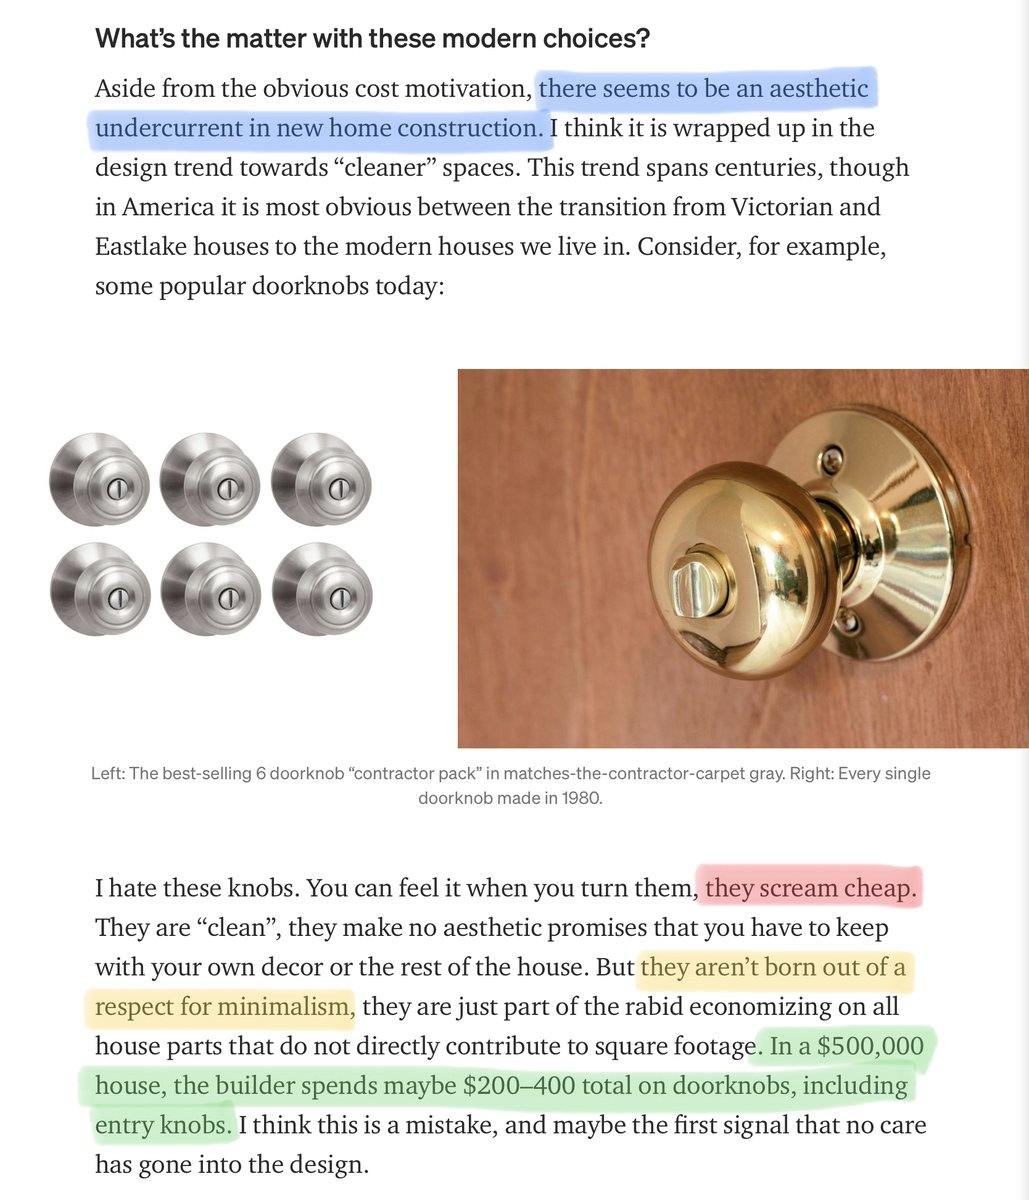 Here’s a lovely meditation from  @simonsarris about what the aesthetic decline of door handles says about contemporary life.Ornate door handles don’t need to be expensive and technology should be a force for a more beautiful world. https://medium.com/@simon.sarris/designing-a-new-old-home-part-2-2a5ea1a1b2b3